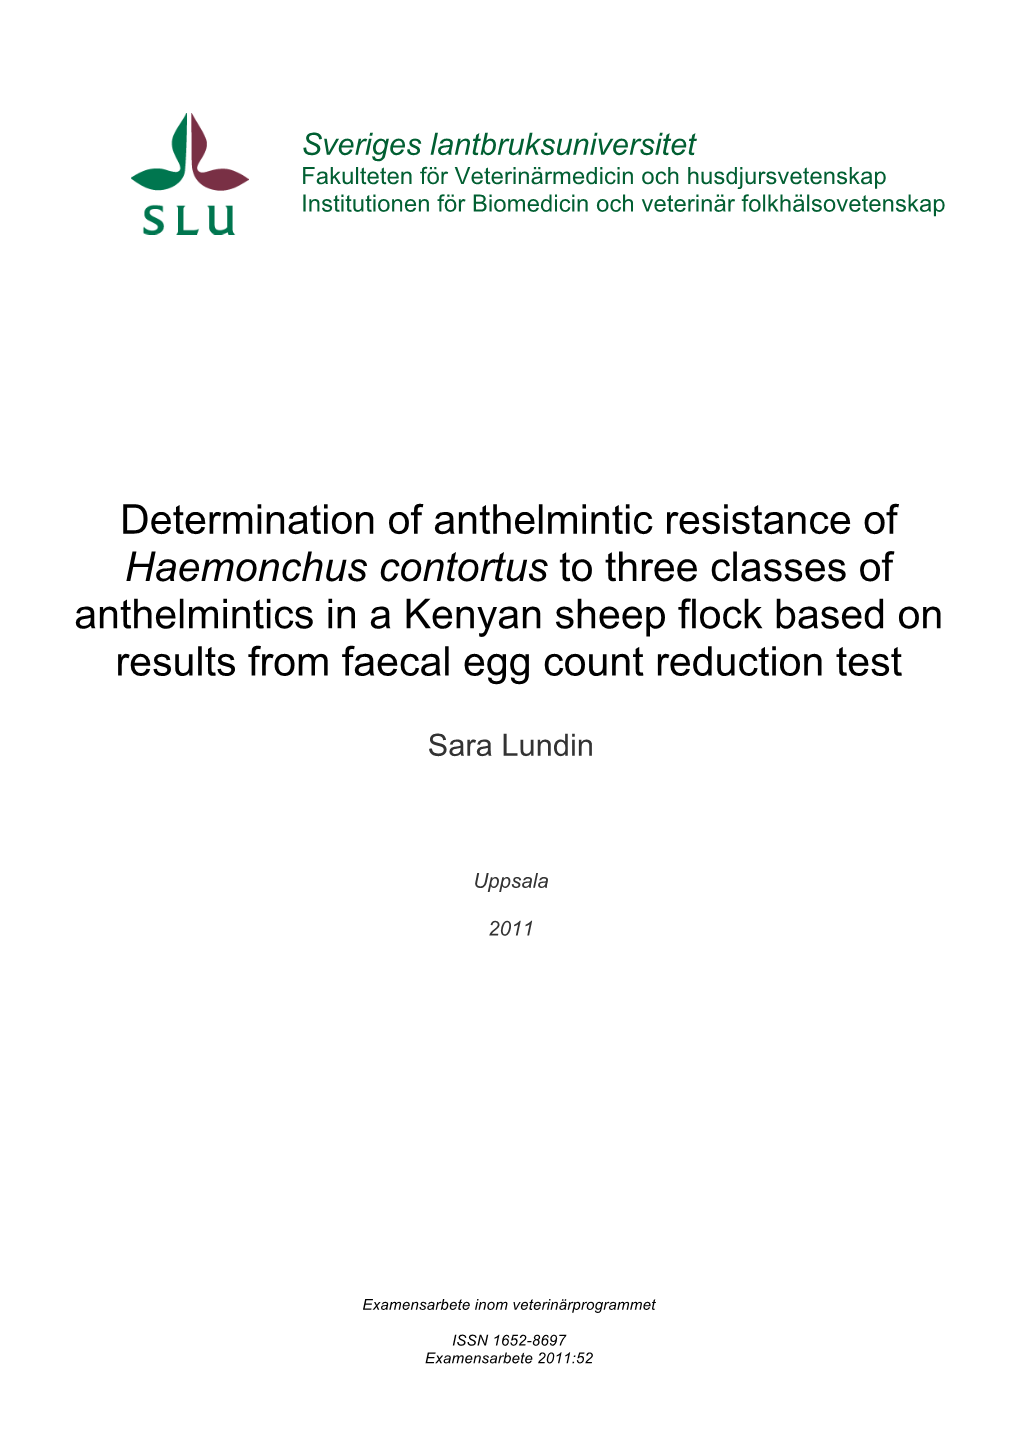 Determination of Anthelmintic Resistance of Haemonchus Contortus to Three Classes of Anthelmintics in a Kenyan Sheep Flock Based